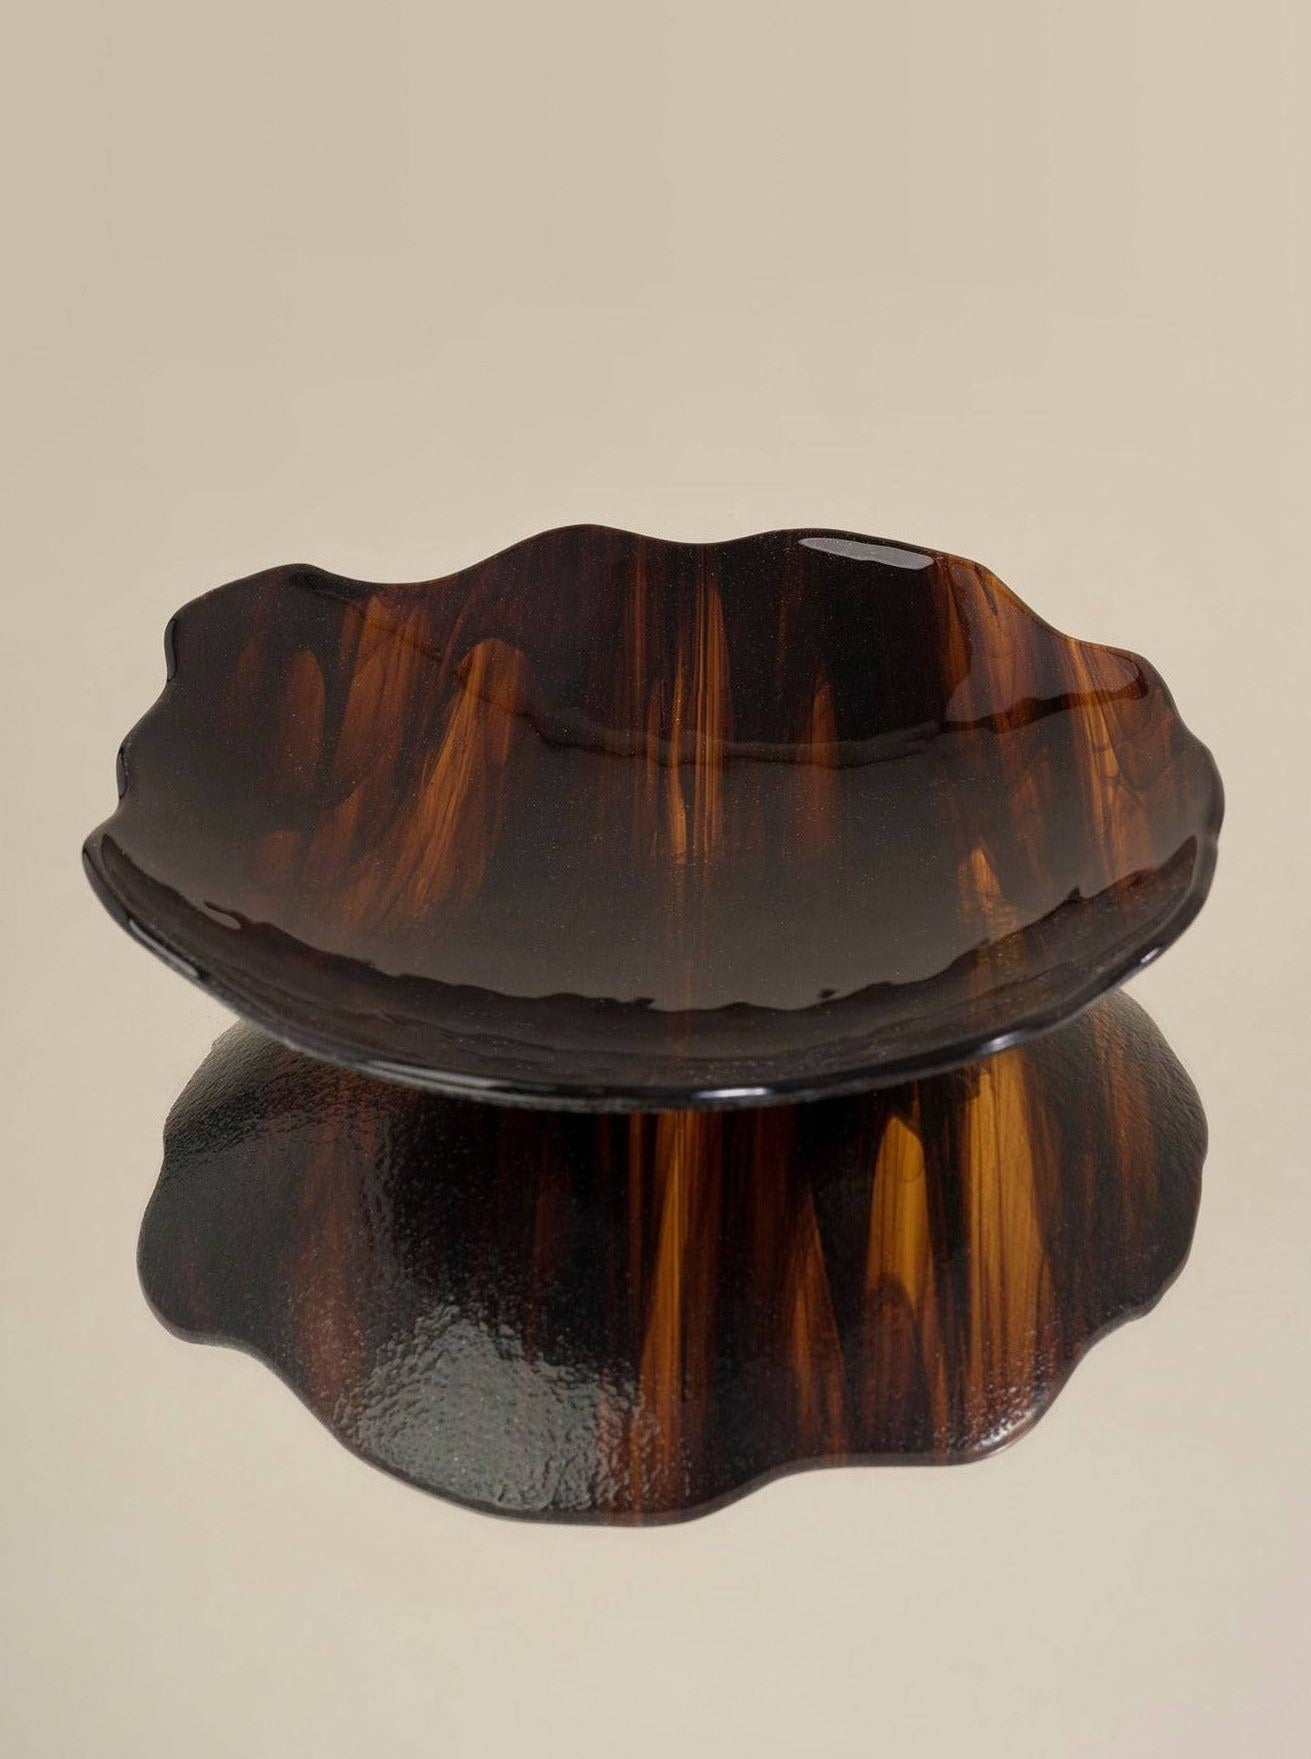 A dark, wooden, wavy-edged Plate Carey Fig by Los Objetos Decorativos displayed on a reflective surface, creating a clear shadow below it. The plate's rich brown tones have swirling patterns characteristic of artisanal manufacturing.